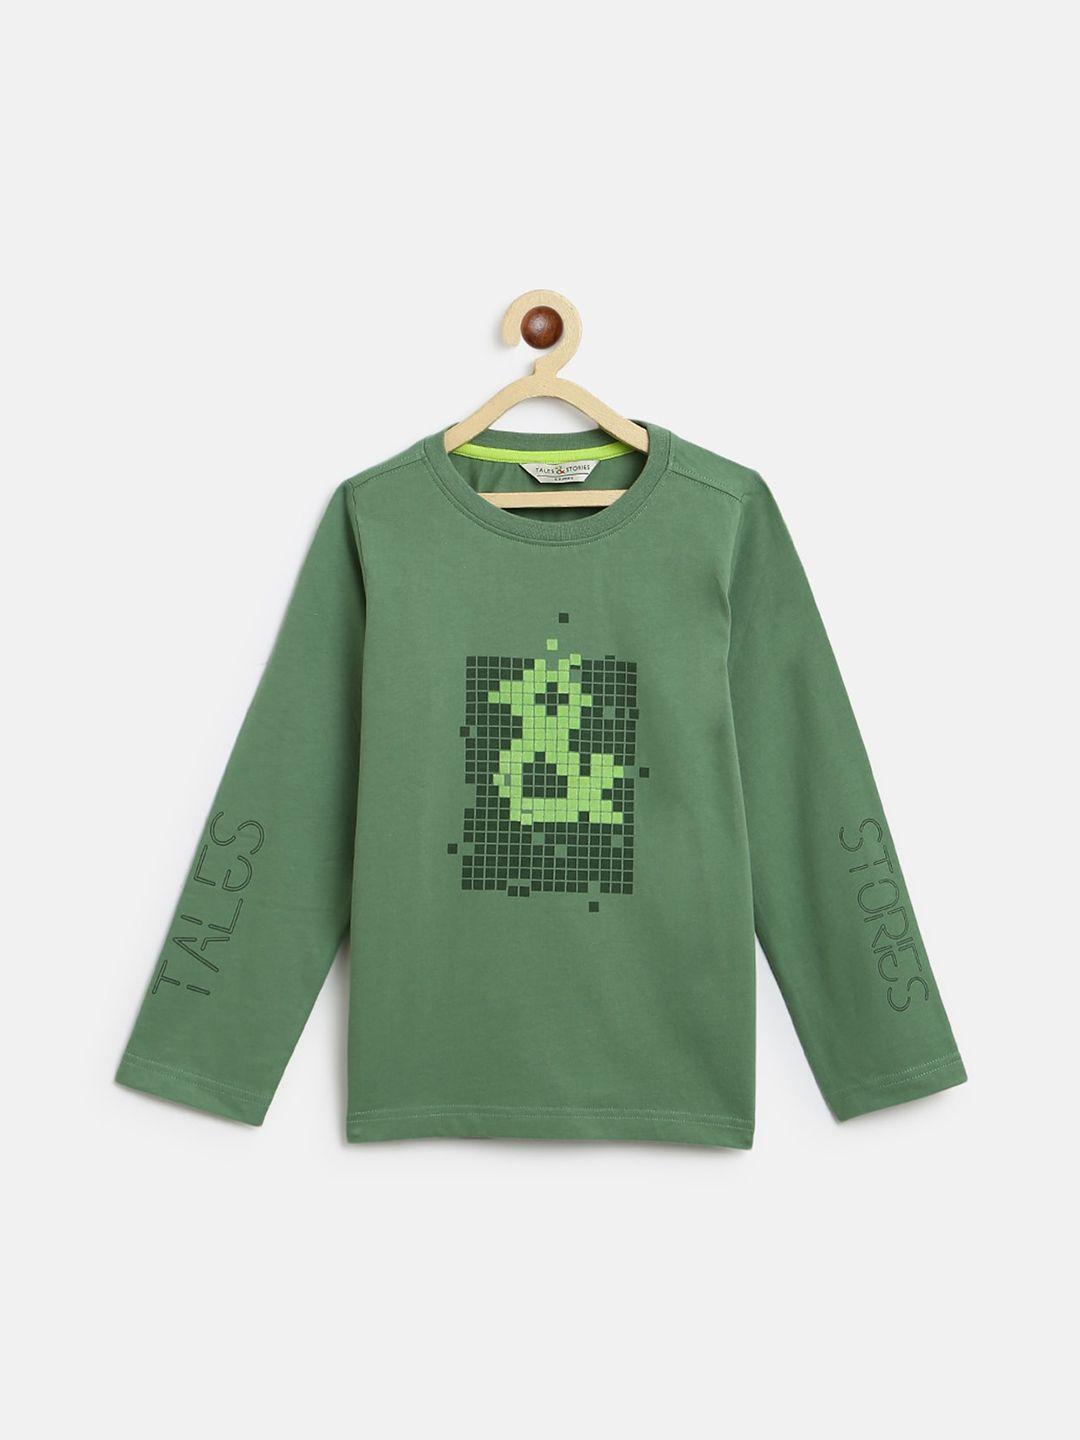 tales & stories boys long sleeves graphic printed cotton t-shirt